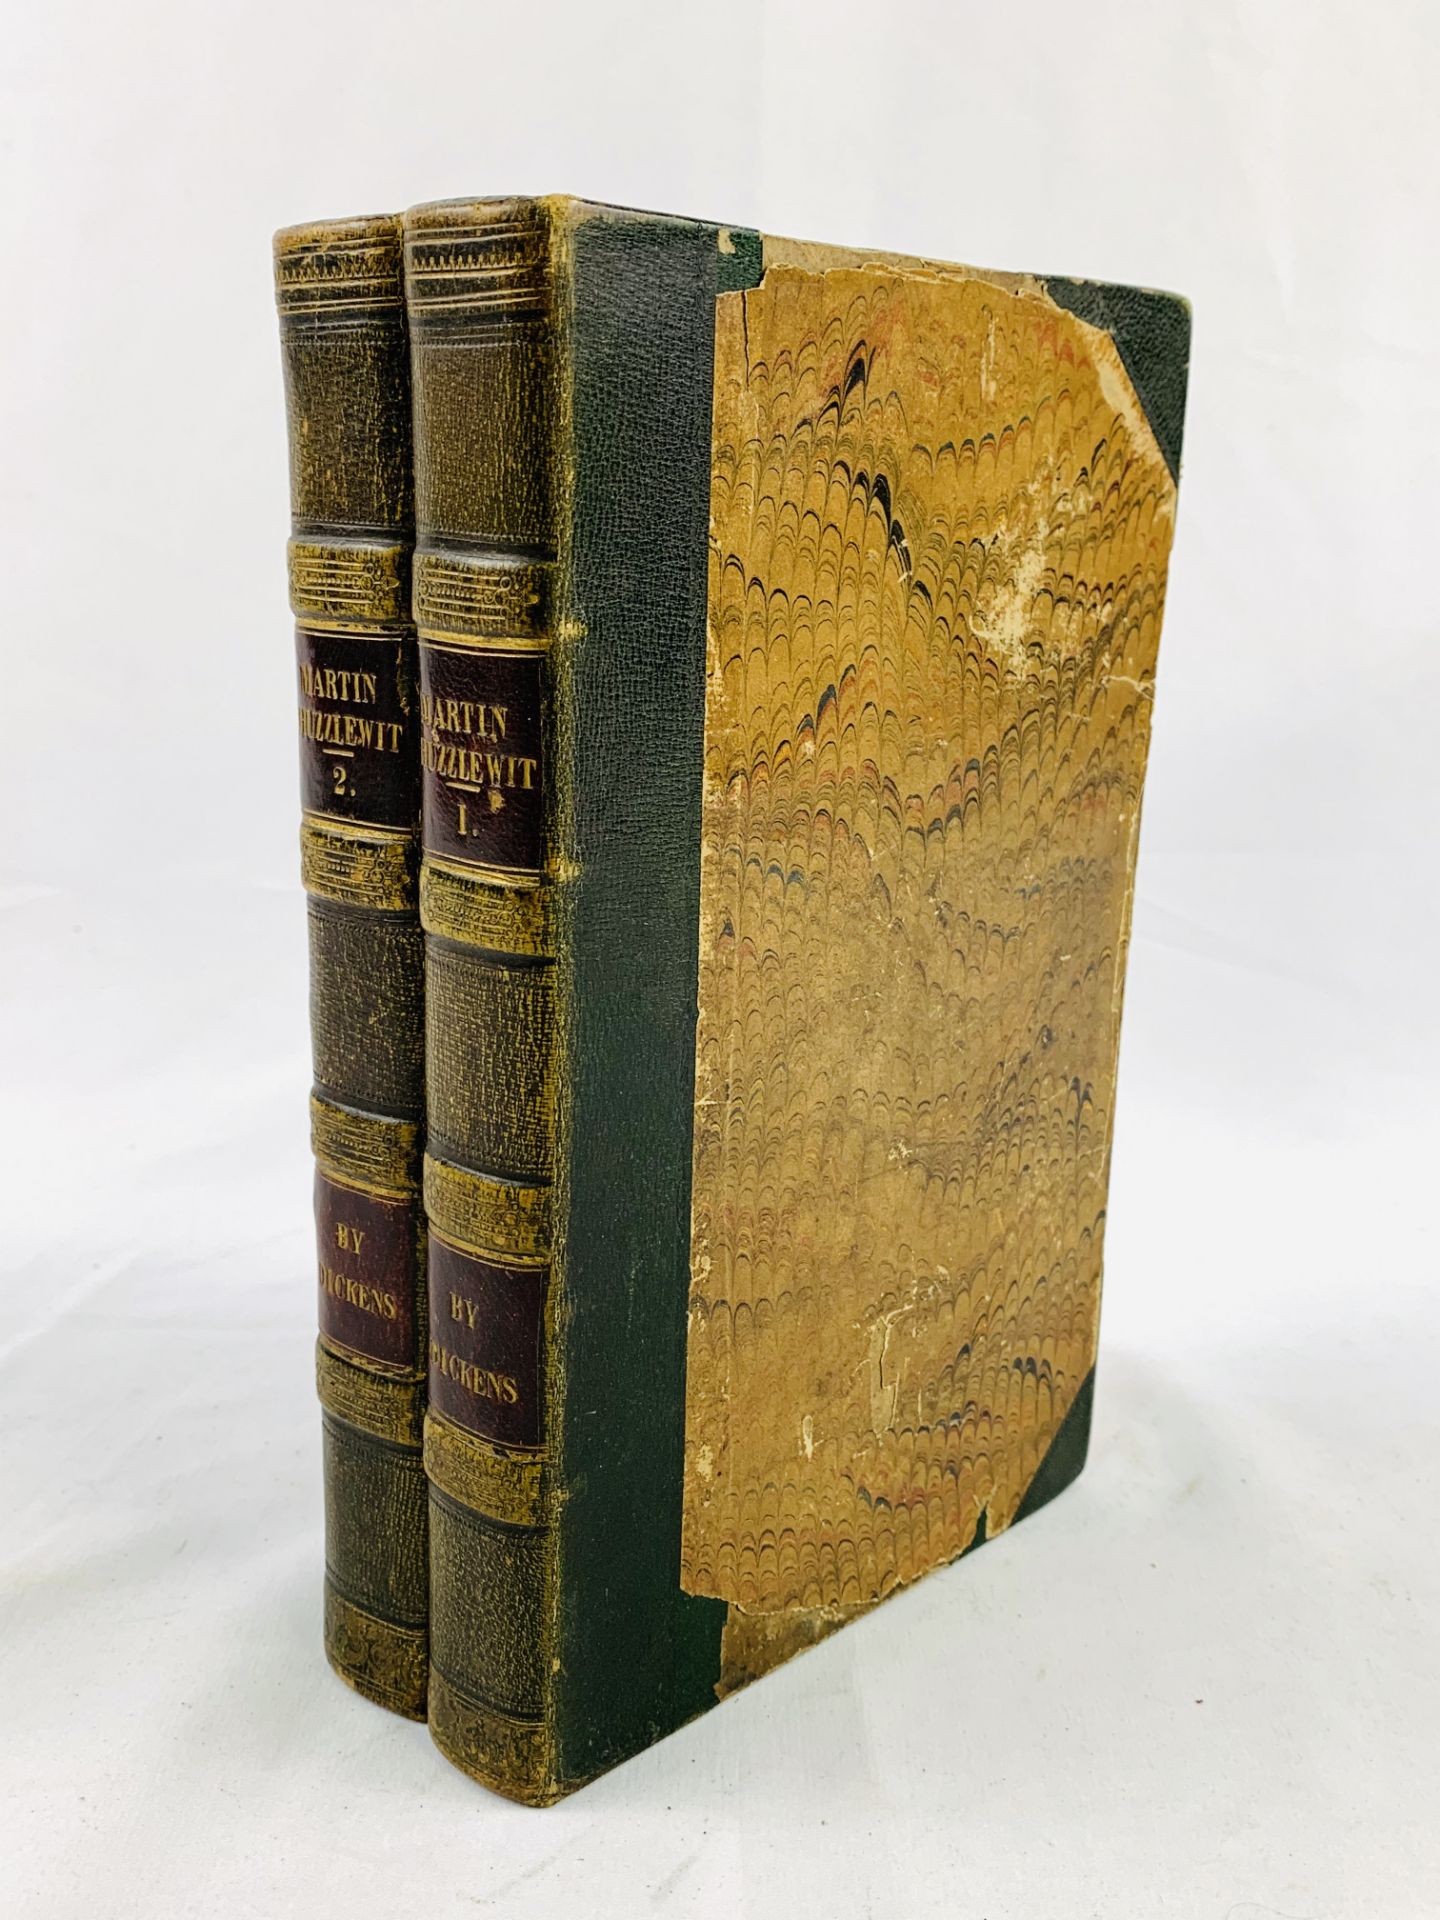 The Life and Adventures of Martin Chuzzlewit by Charles Dickens, Chapman & Hall 1844, 1st Edition.